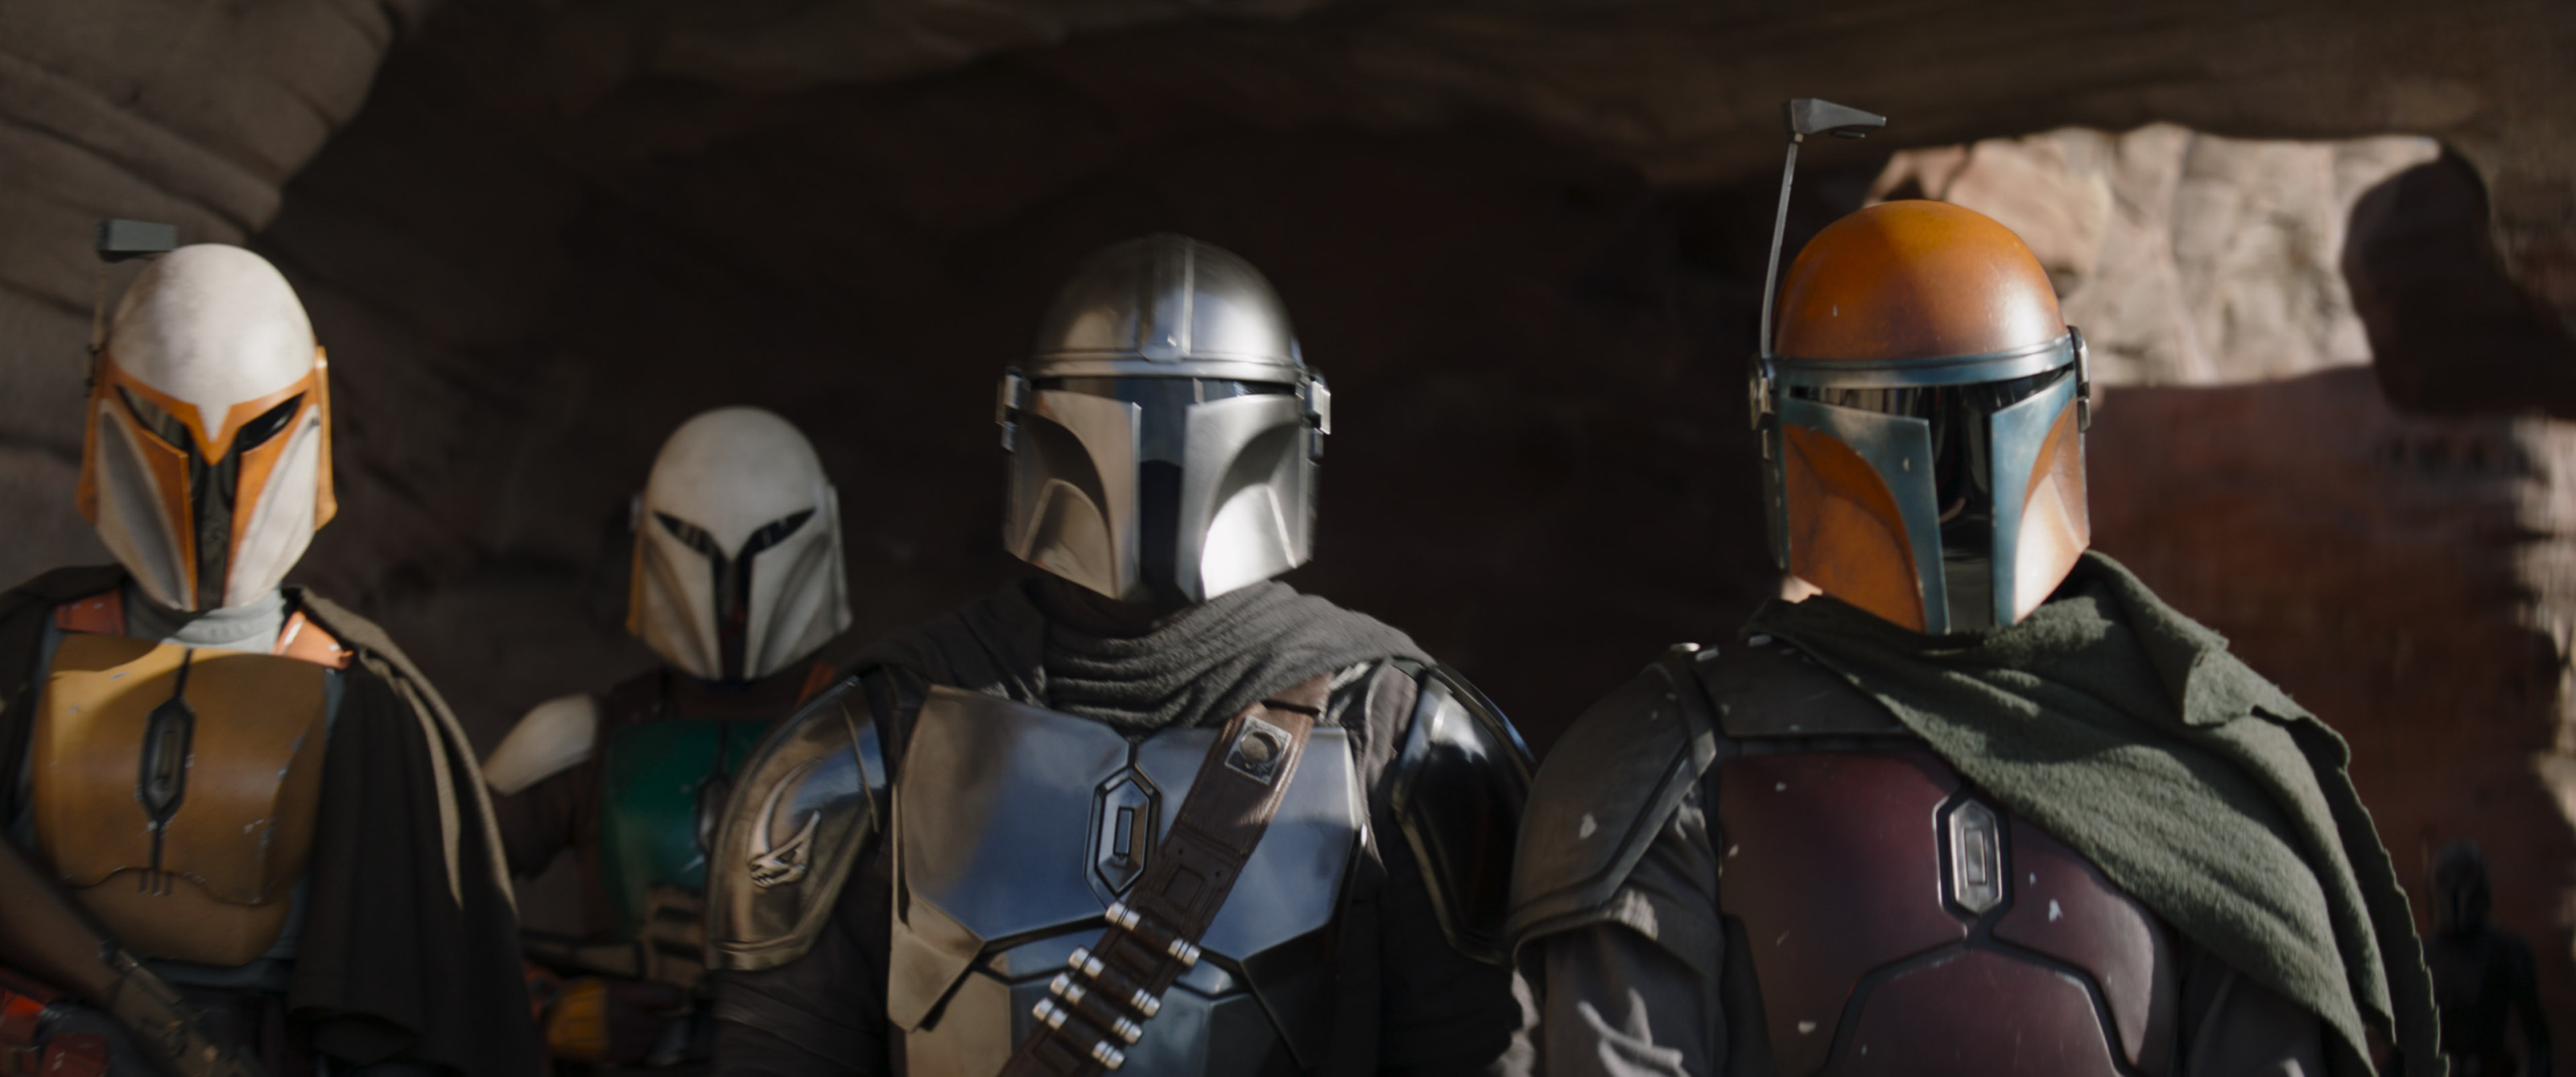 The Mandalorian season 3 is not coming to Disney Plus in February 2023